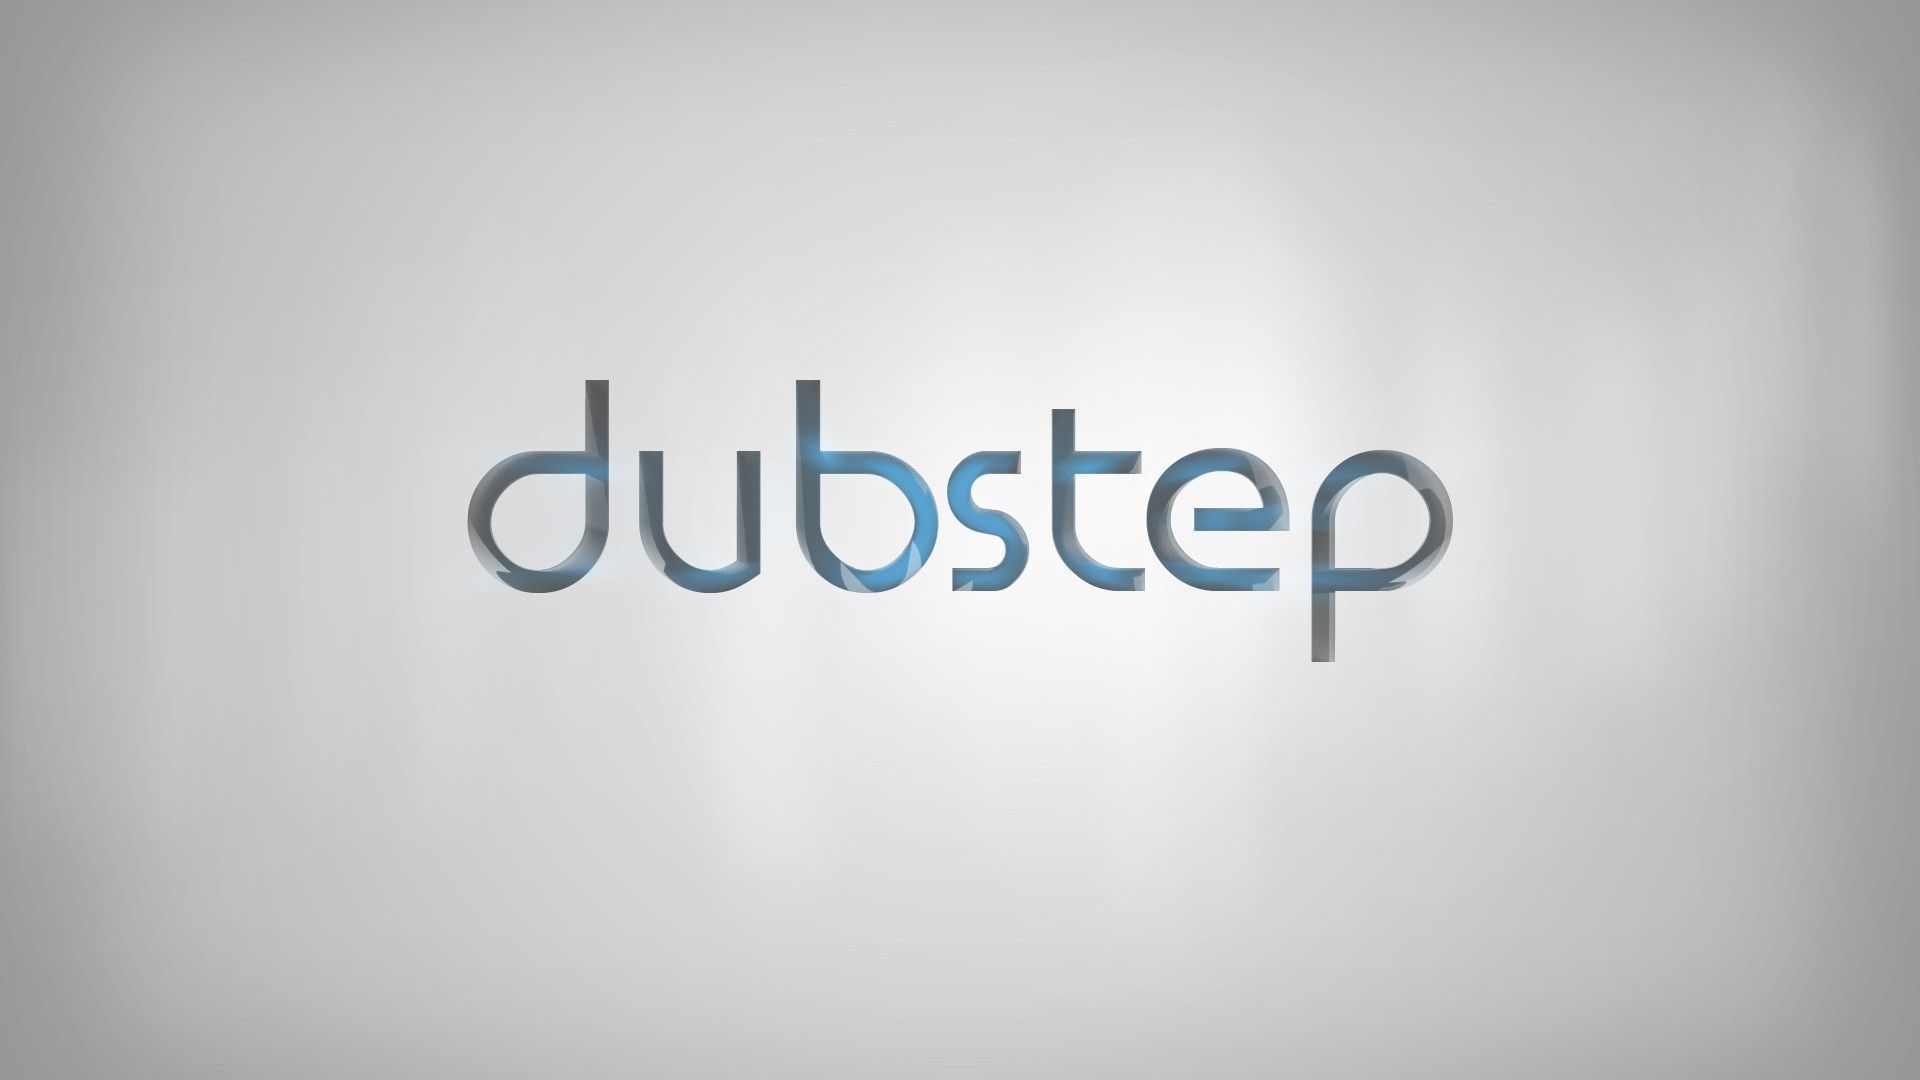 Download Dubstep Photos Wallpaper Gallery #14fhk9fe5f - Download ...